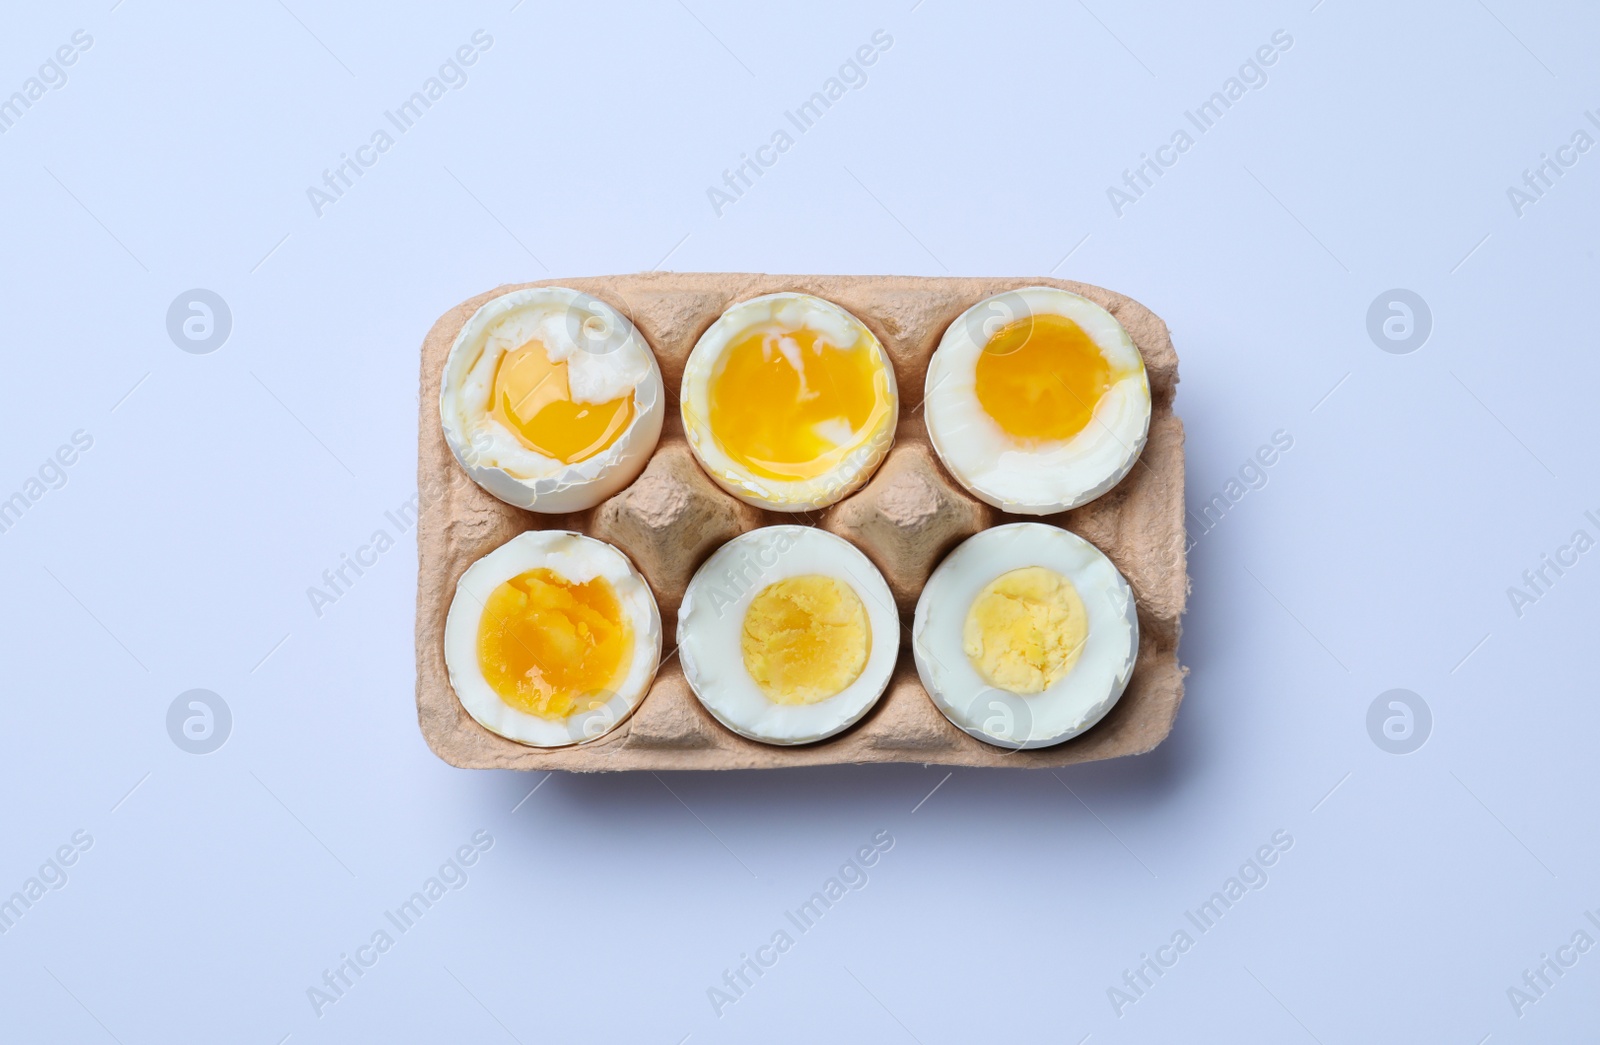 Photo of Boiled chicken eggs of different readiness stages in carton on white background, top view